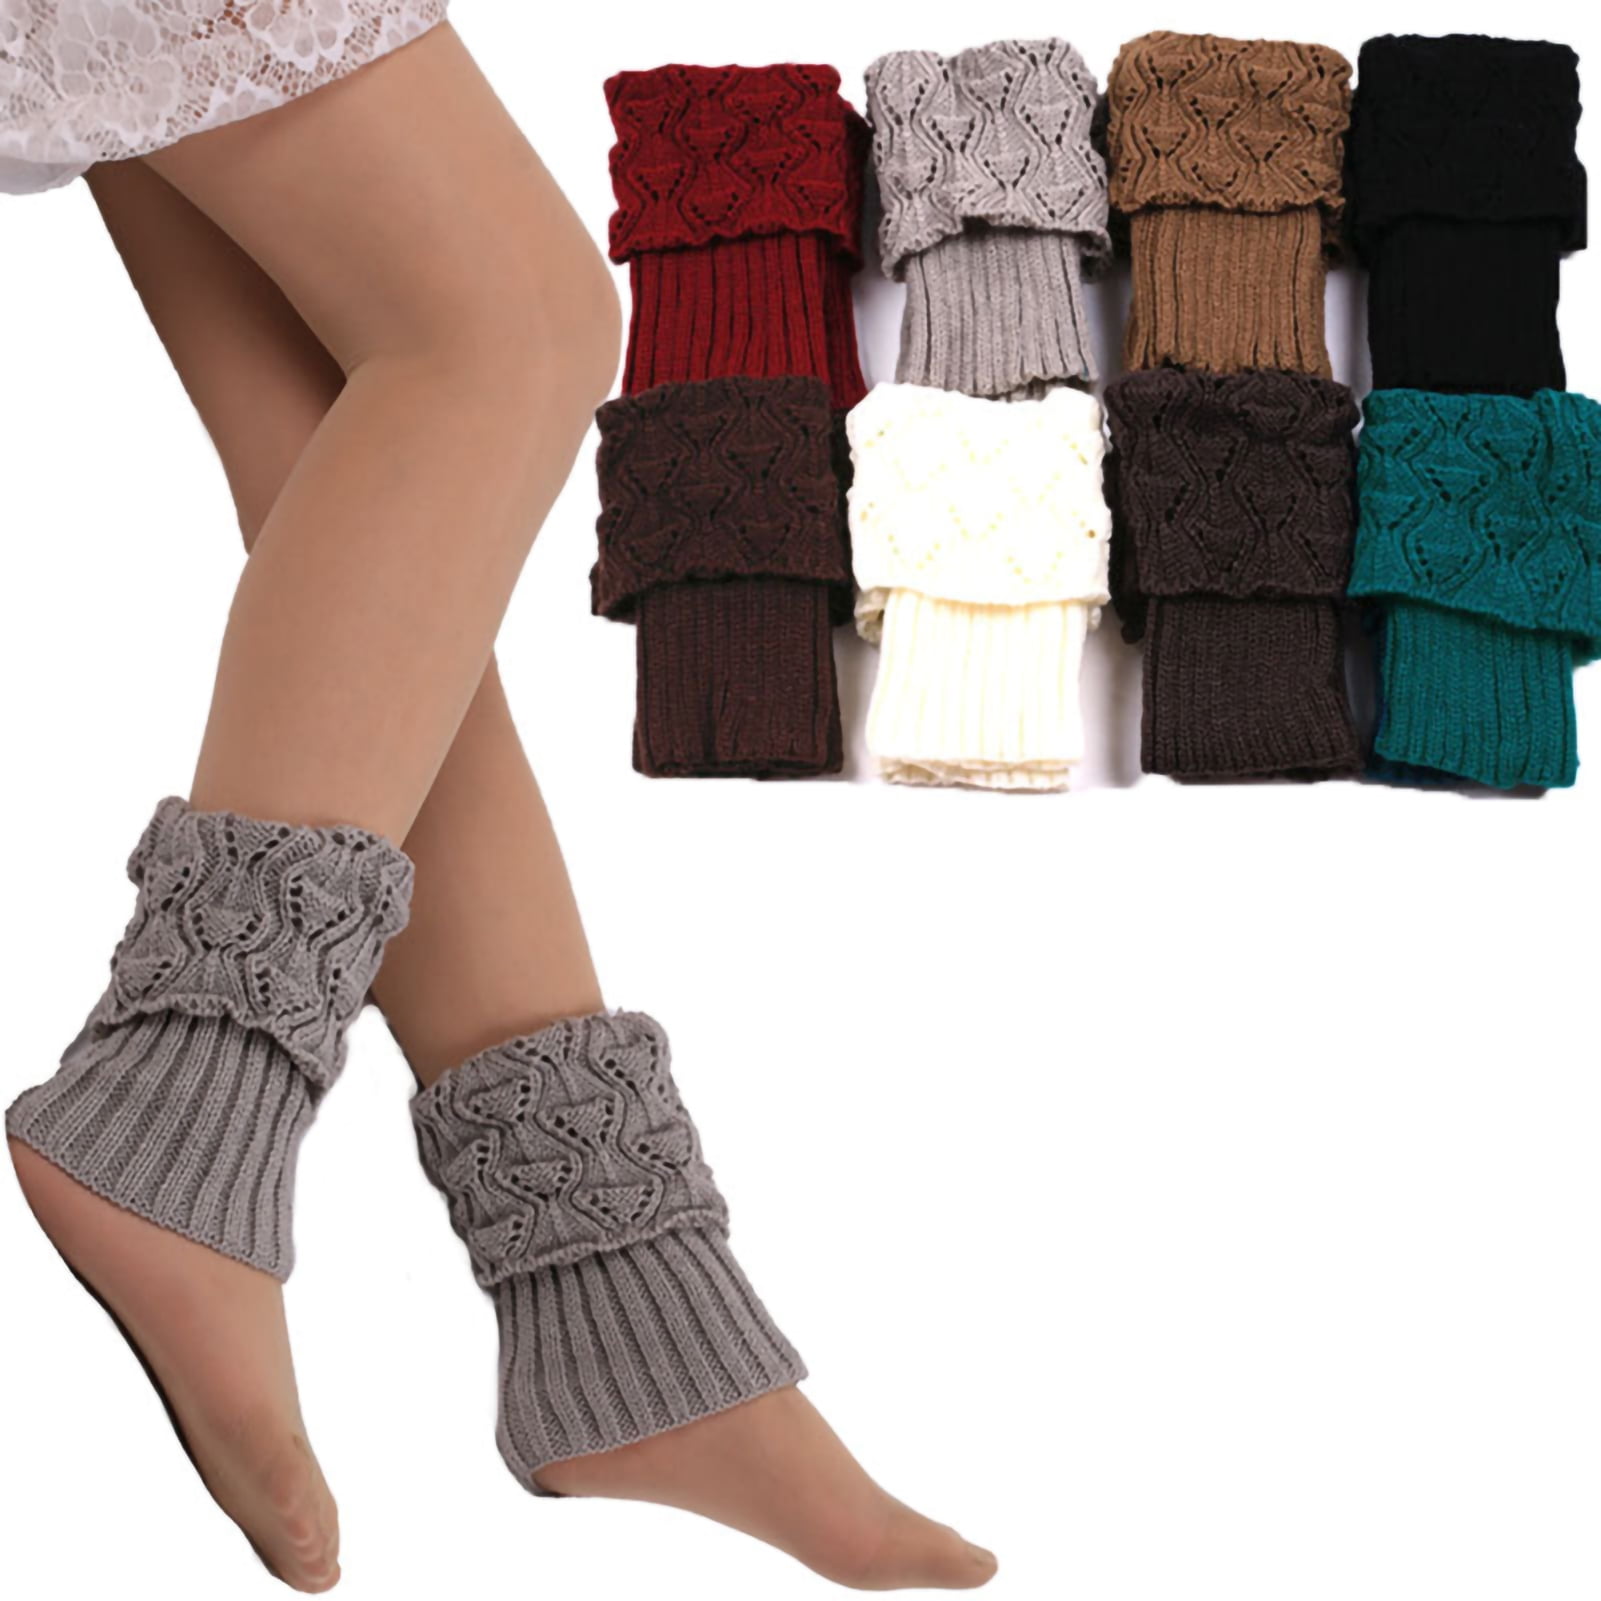 3 Pairs Womens Winter Warm Leg Warmers Soft Knitted Twist Boot Cuffs Toppers Socks Slouch Button Design Short Ankle Warmers for Girls Ladies Adults 